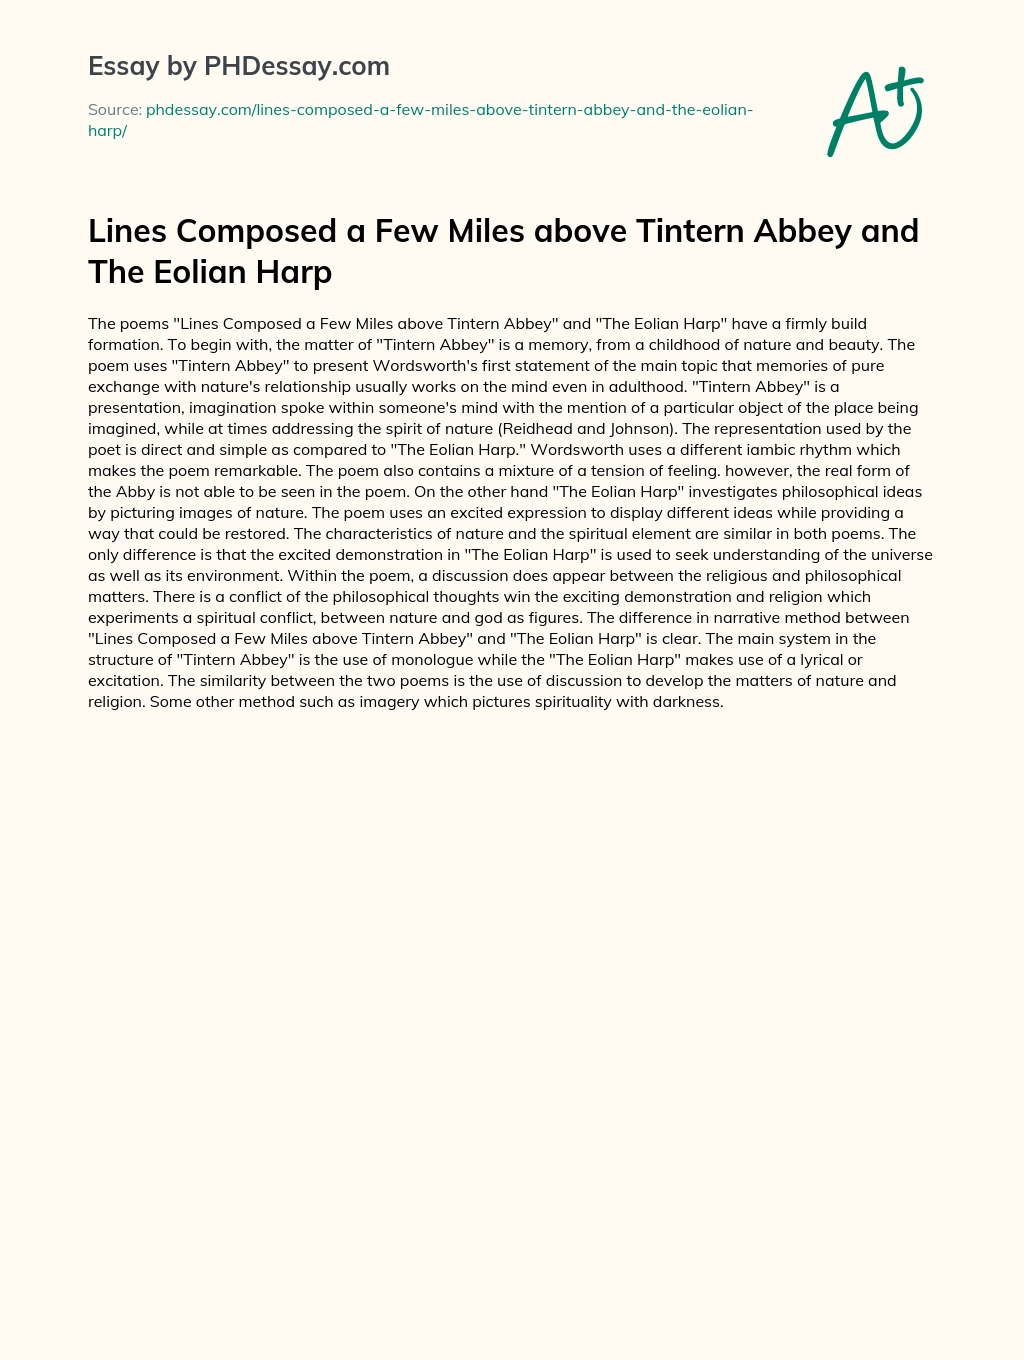 Lines Composed a Few Miles above Tintern Abbey and The Eolian Harp essay